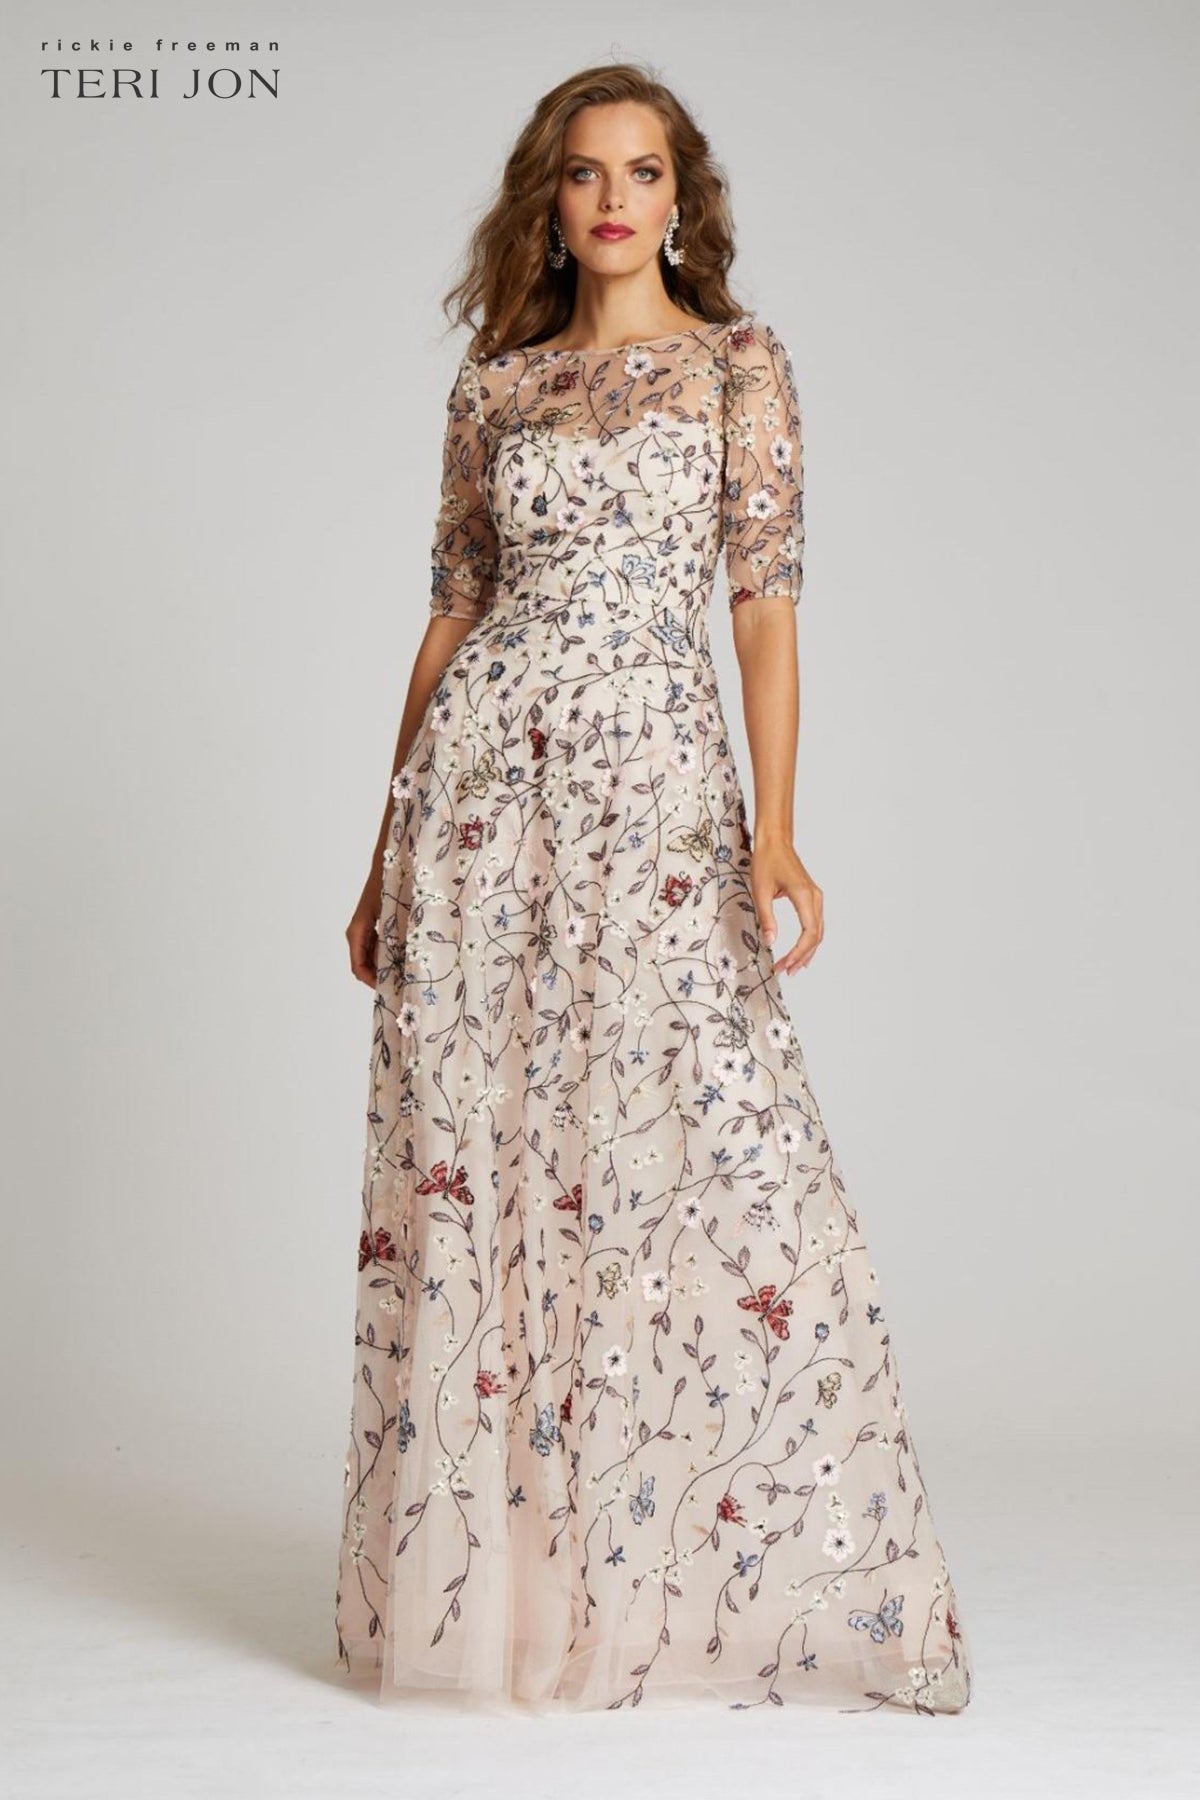 Sheer Black Lace Overlay Ivory Underneath Evening Dress - Lunss